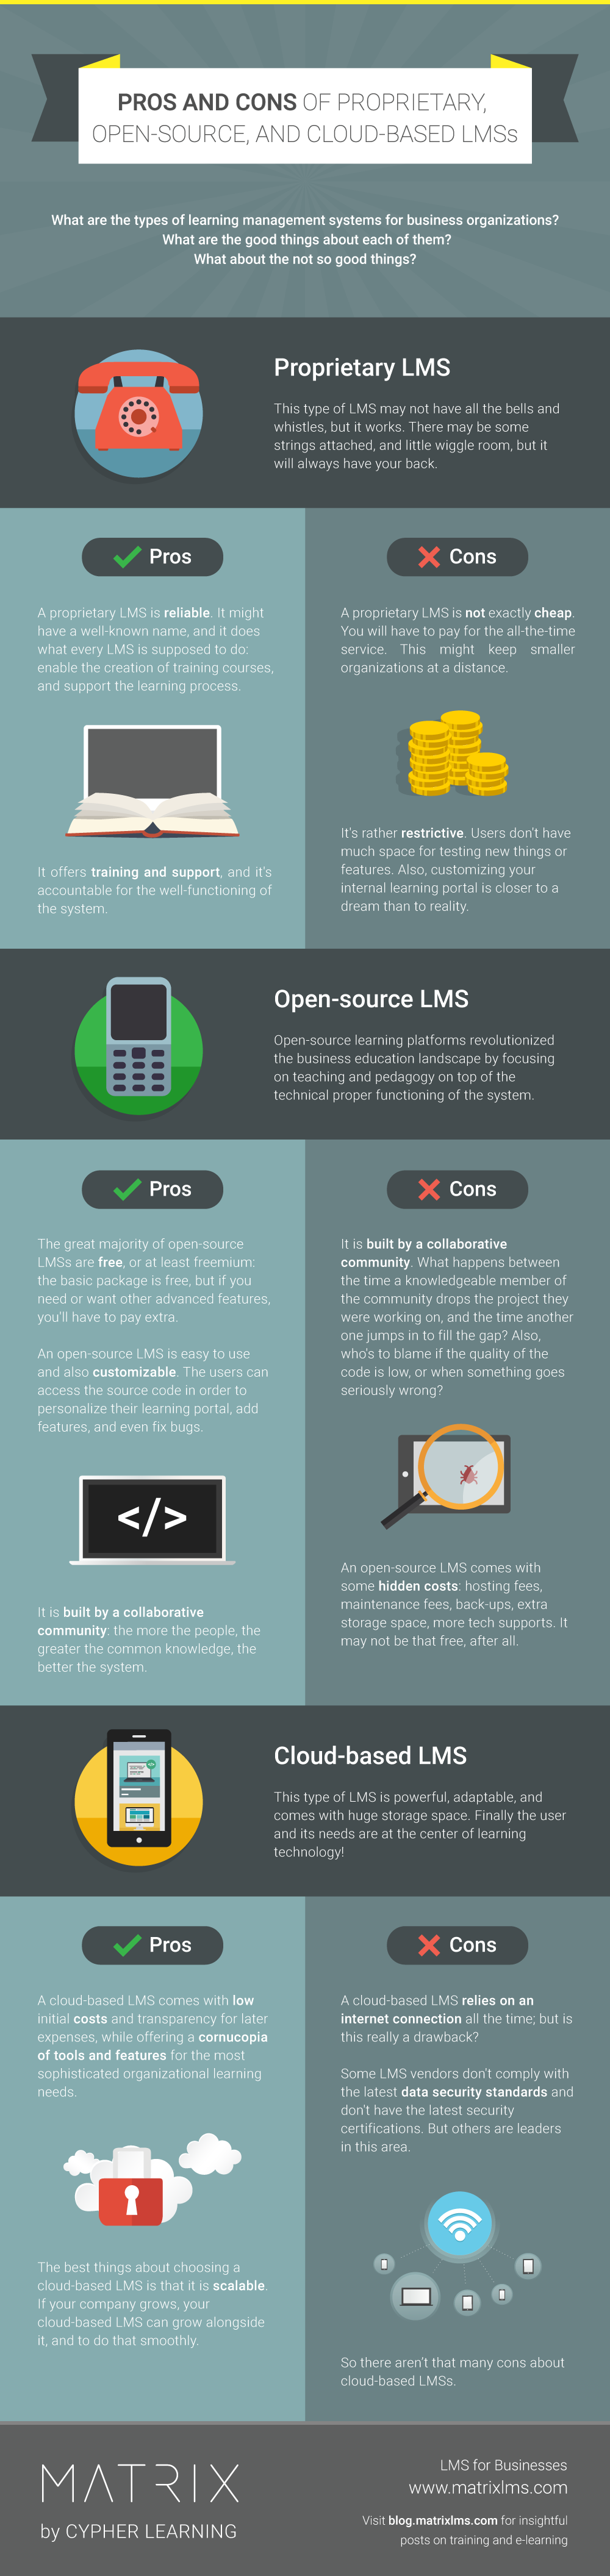 pros-and-cons-of-proprietary-open-source-and-cloud-based-lmss Infographic